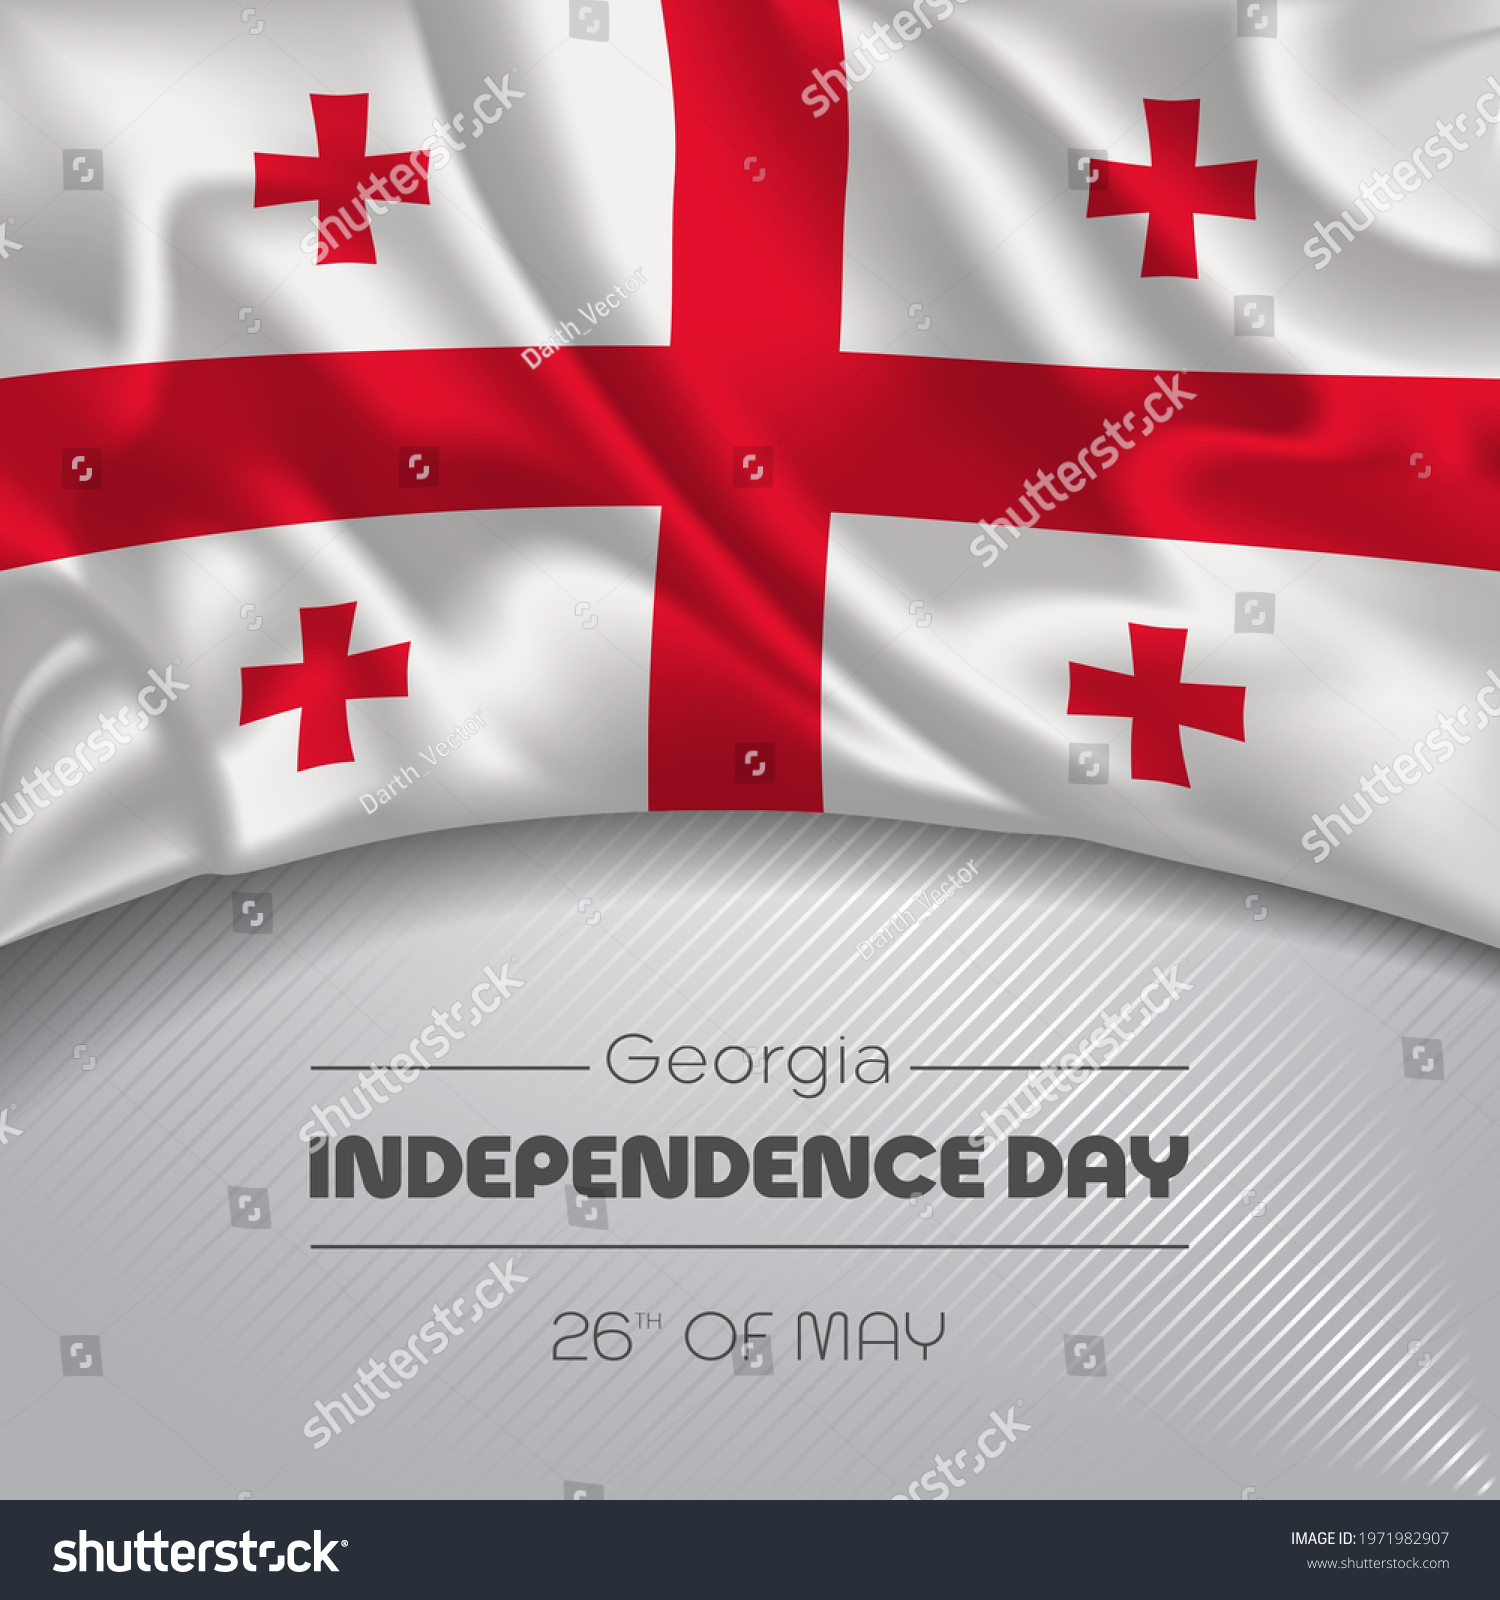 SVG of Georgia happy independence day greeting card, banner vector illustration. Georgian national holiday 26th of May square design element with waving flag svg